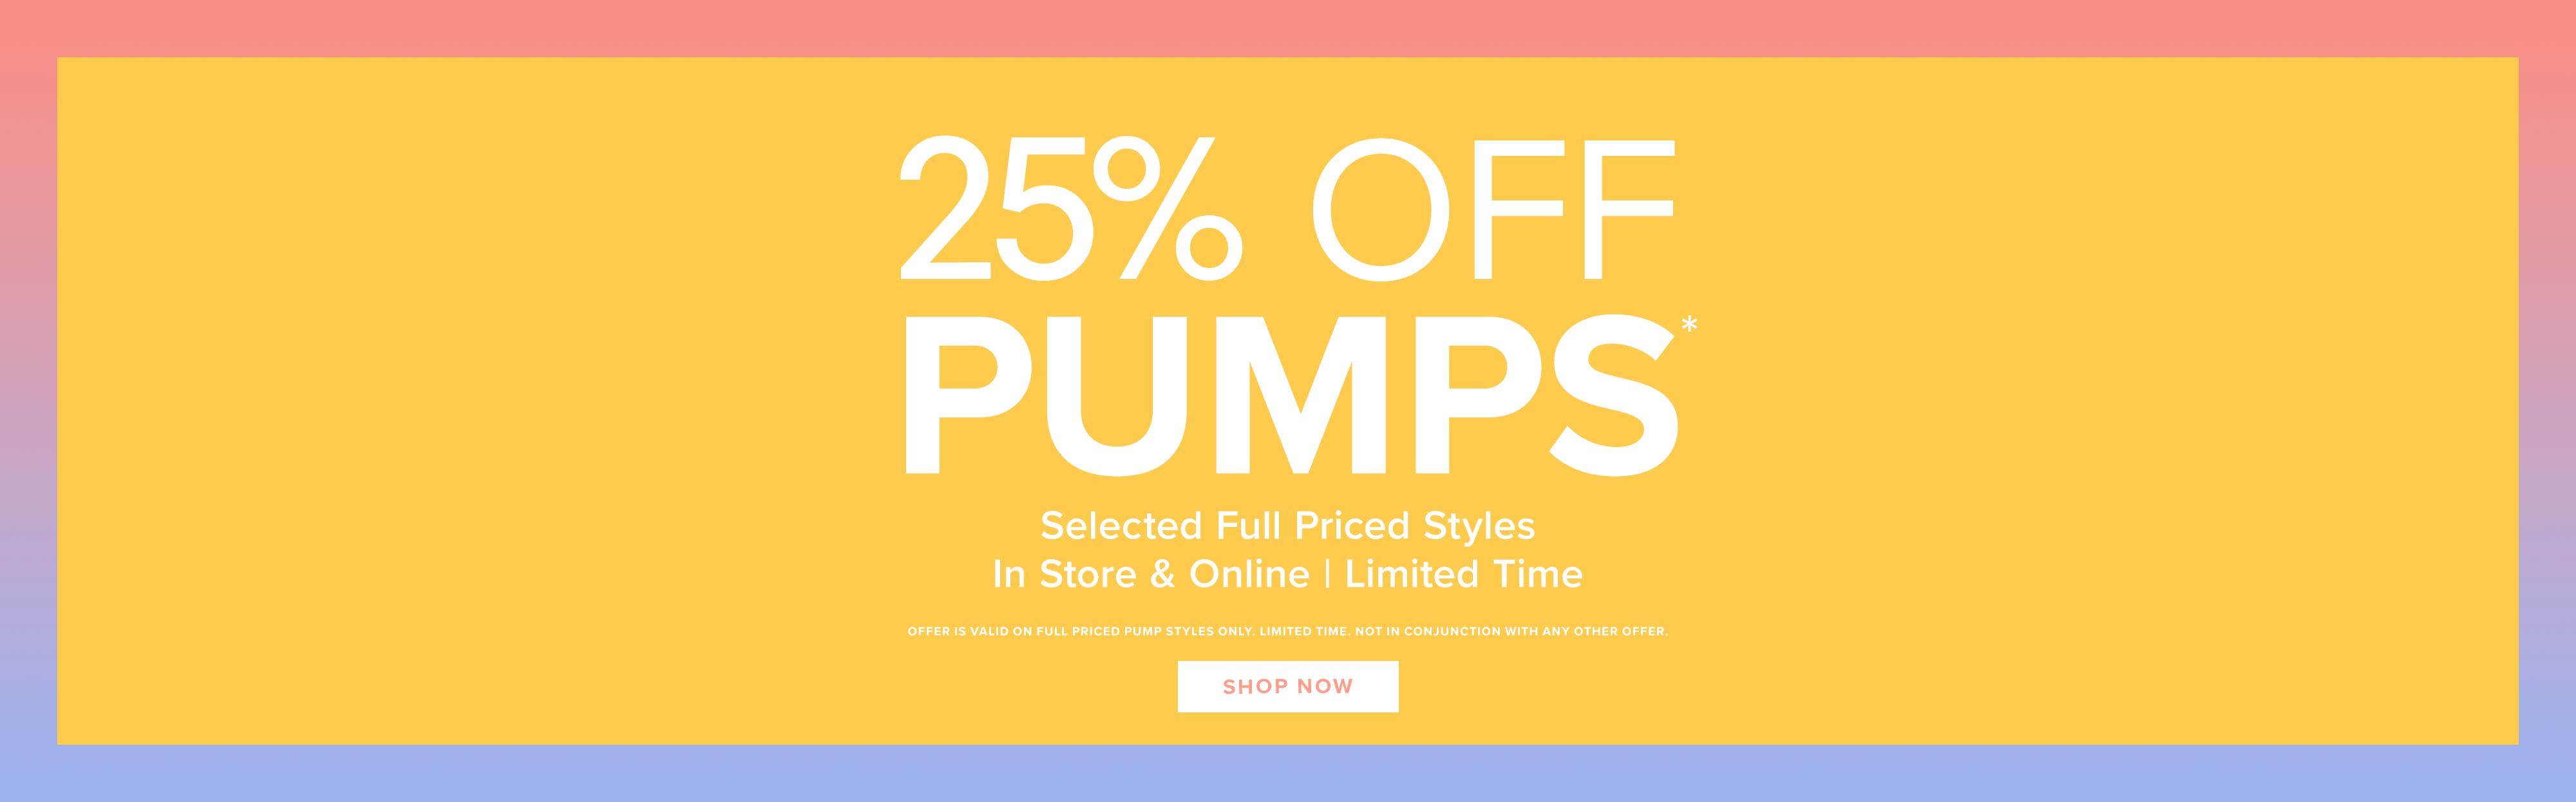 Nine West 25% OFF selected full priced Pump styles